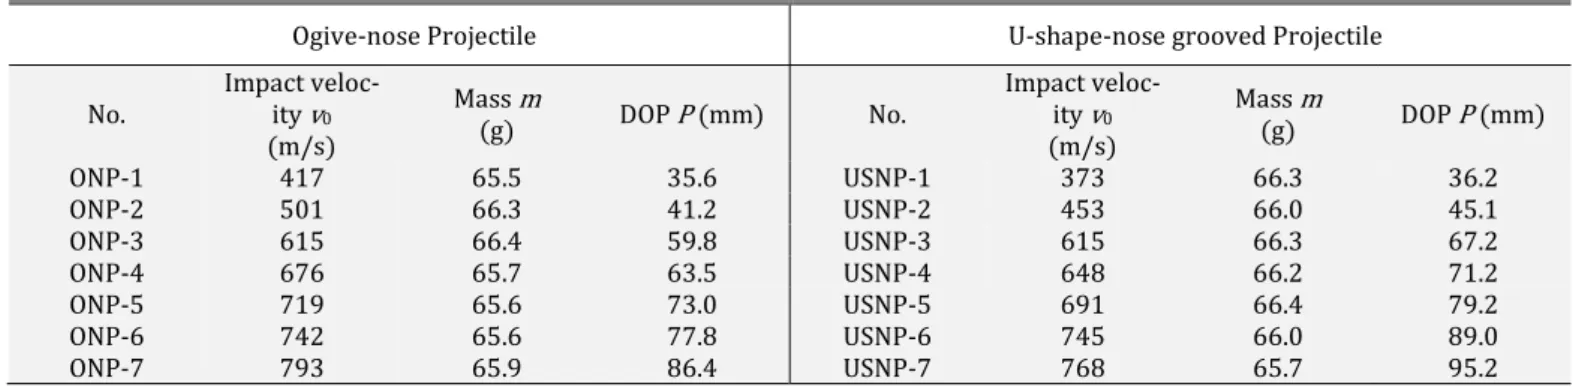 Table 2: Experiment data of DOP between ogive-nose projectile and U-shape-nose projectile 